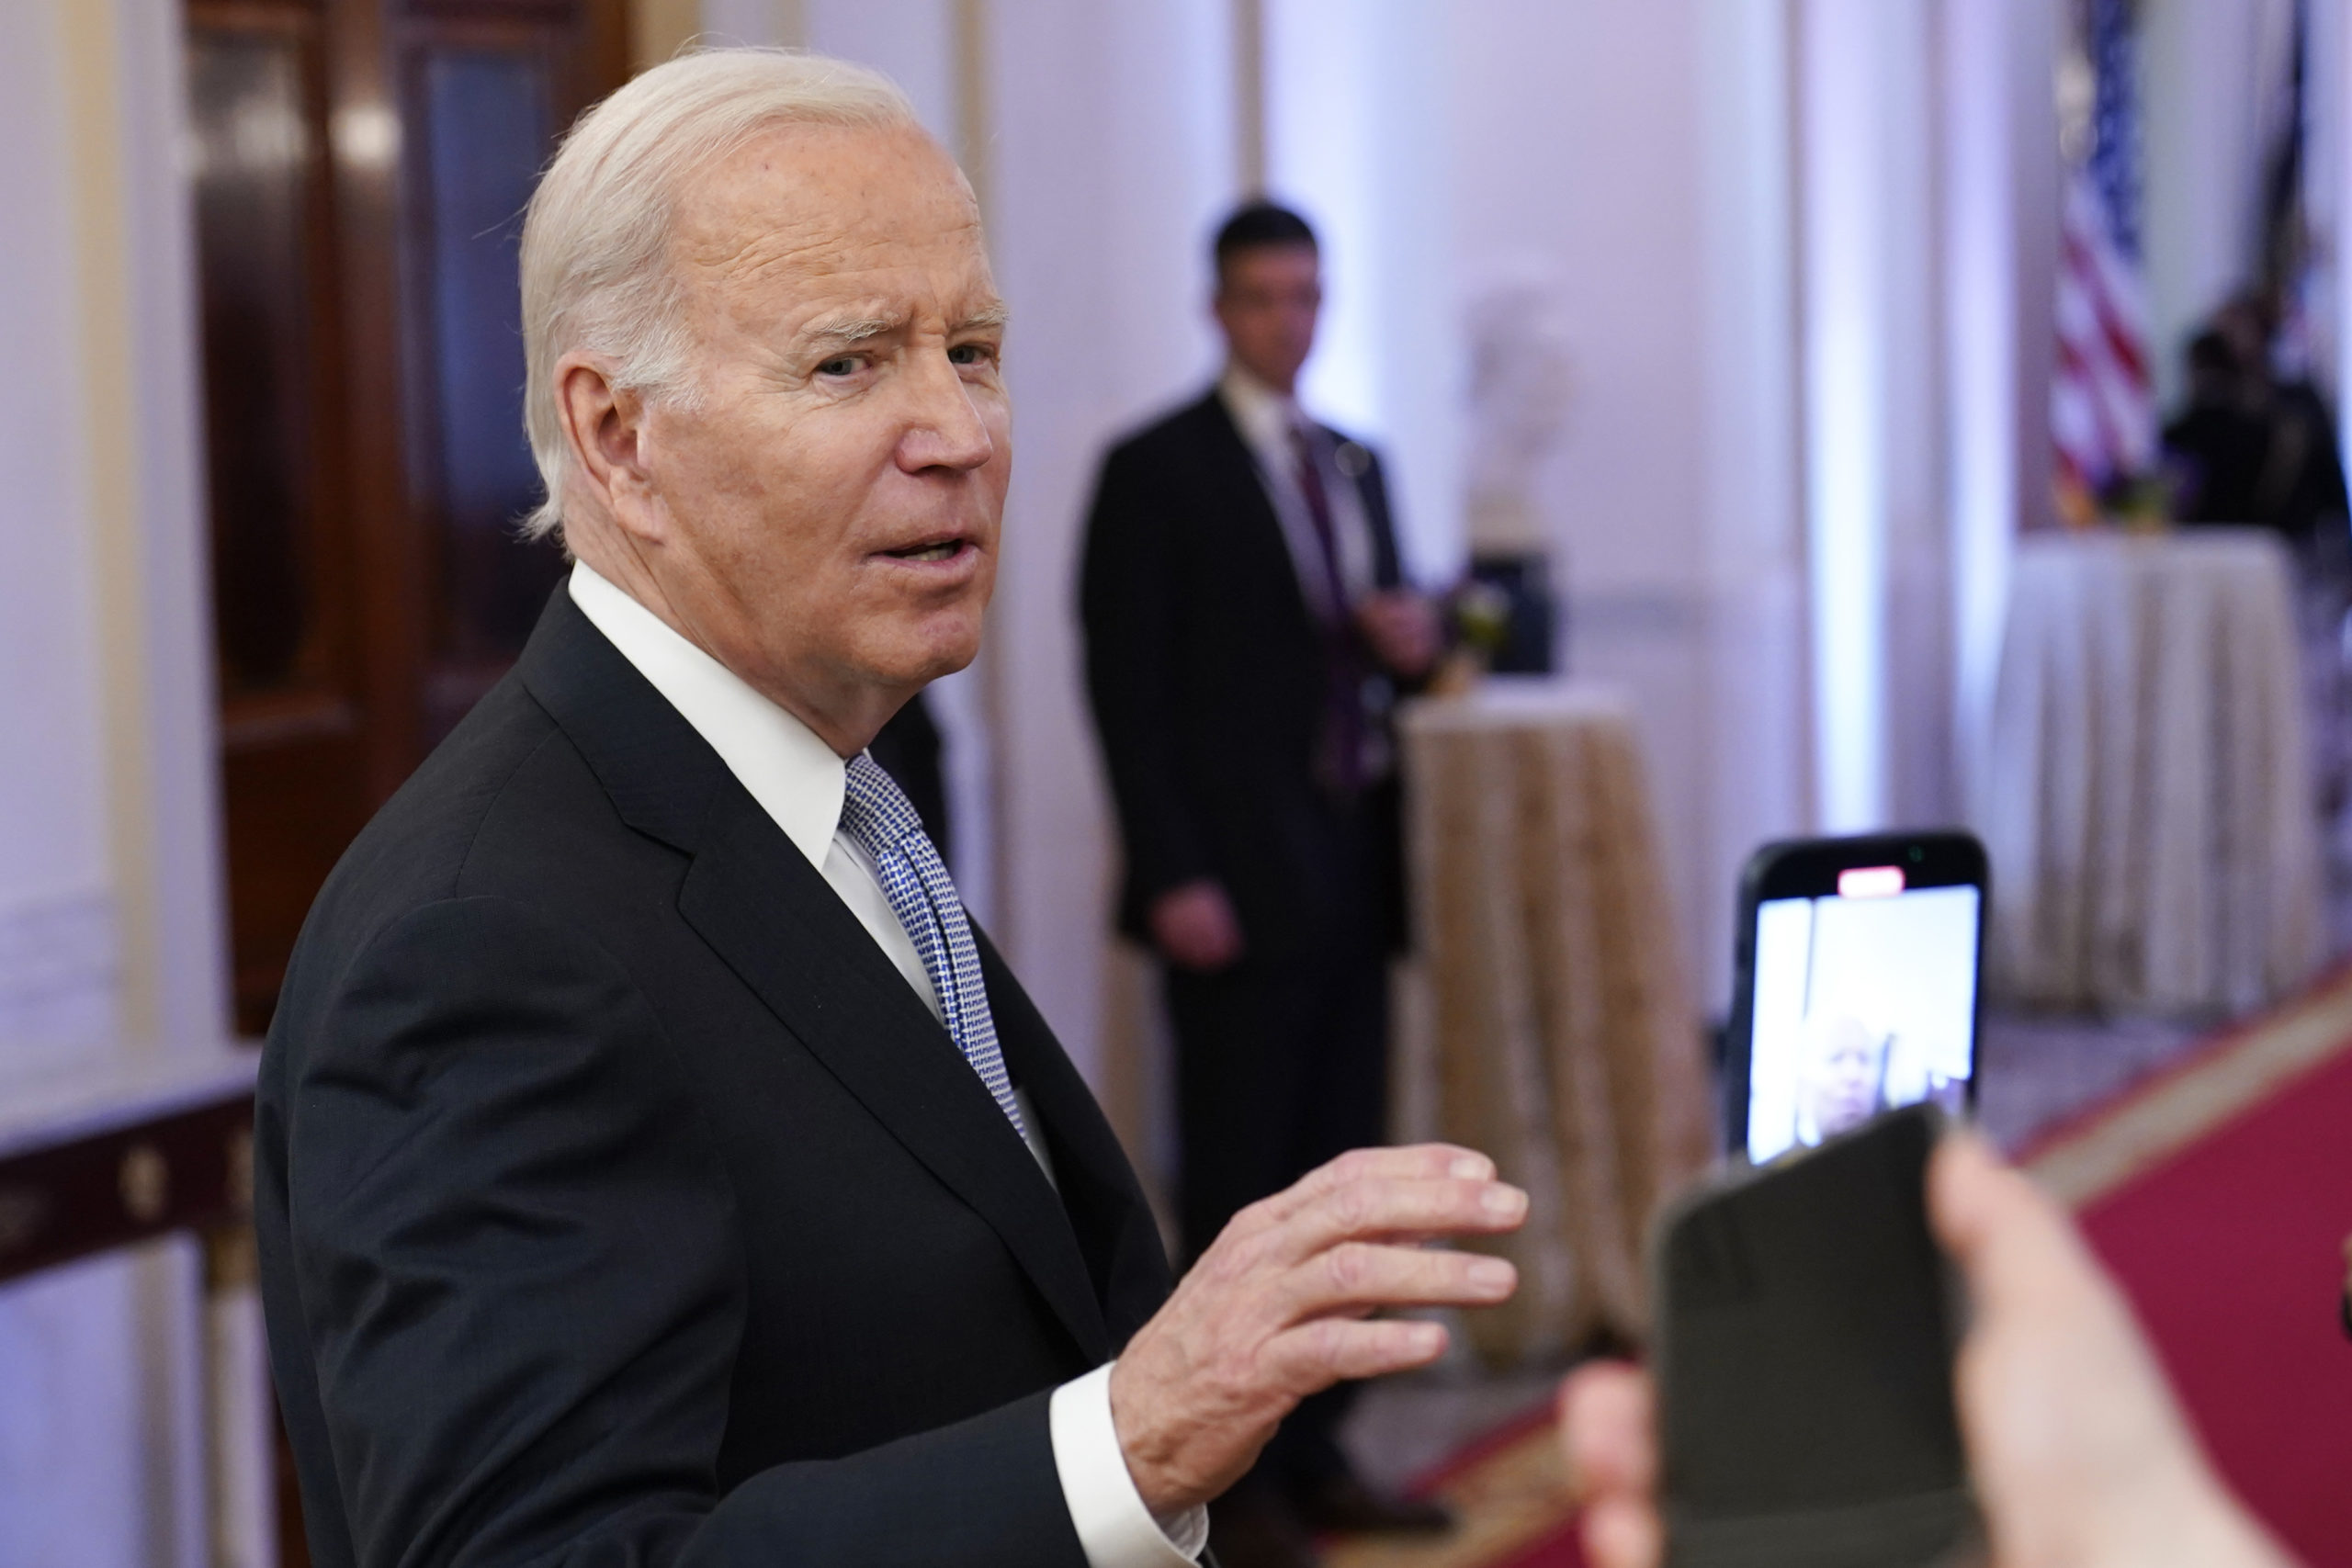 President Joe Biden talks with reporters after speaking in the East Room of the White House on Friday.